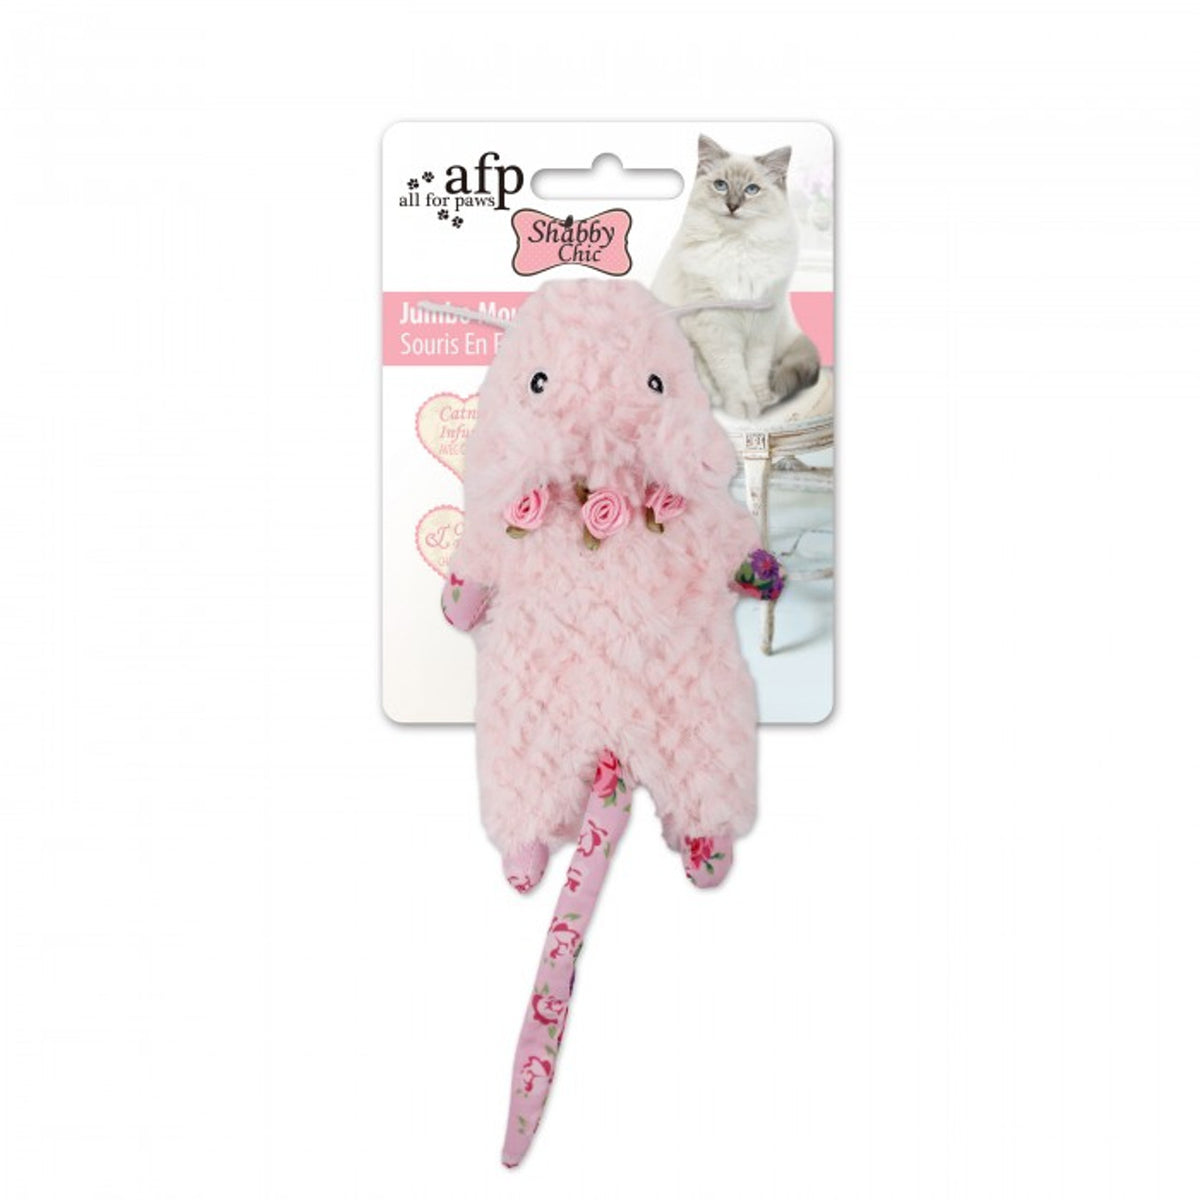 All for Paws Shabby Chic Jumbo Mouse